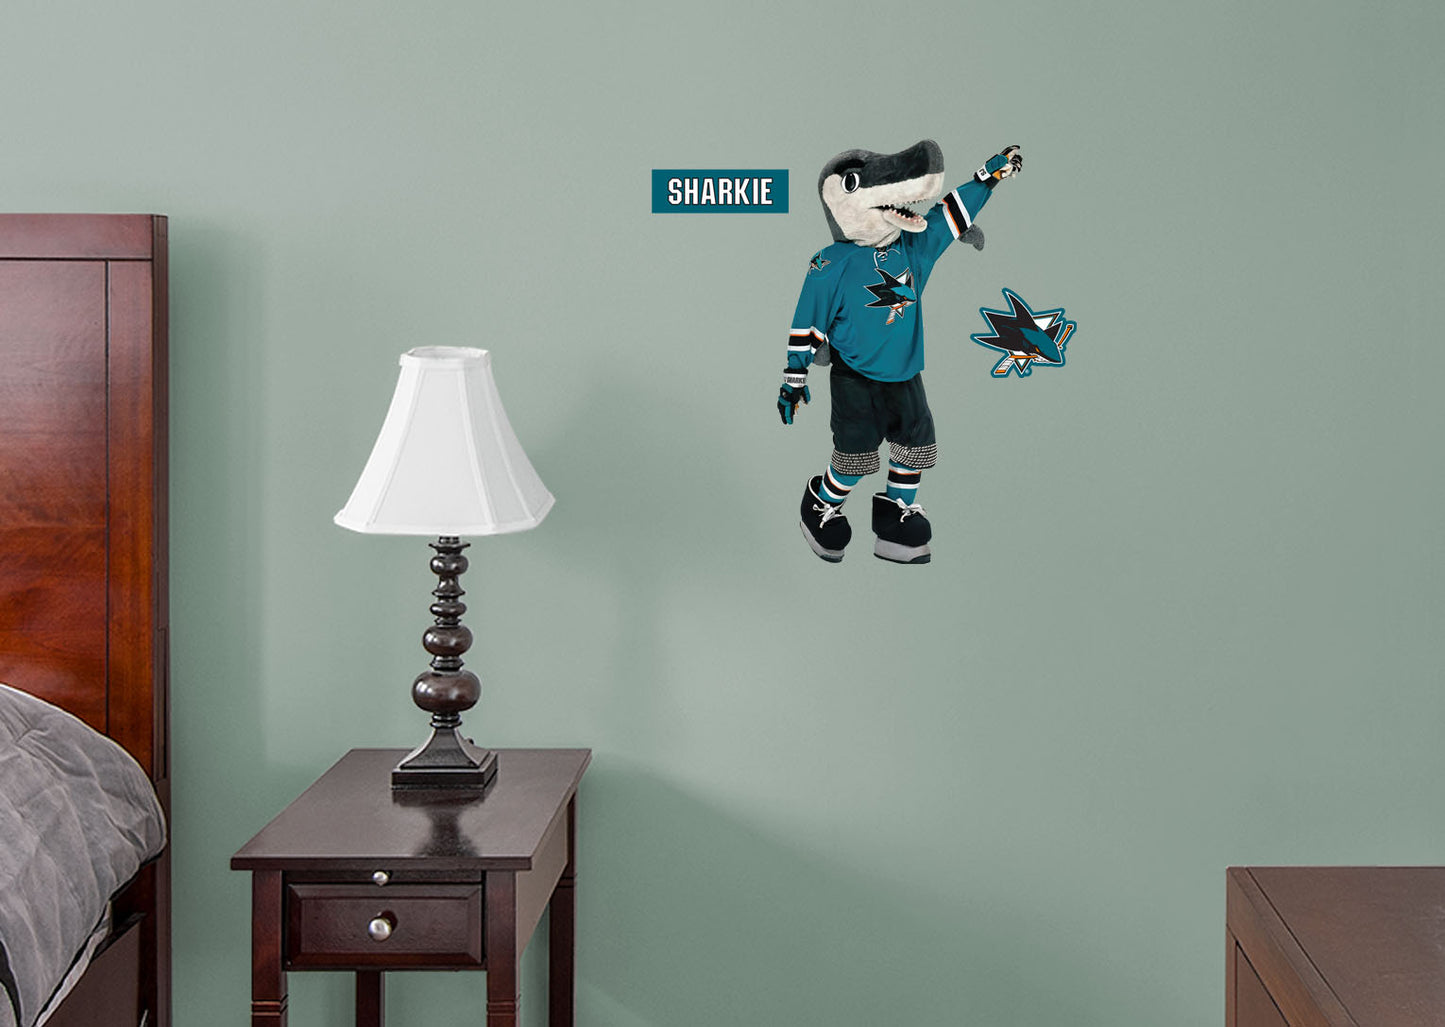 San Jose Sharks: S.J. Sharkie  Mascot        - Officially Licensed NHL Removable Wall   Adhesive Decal